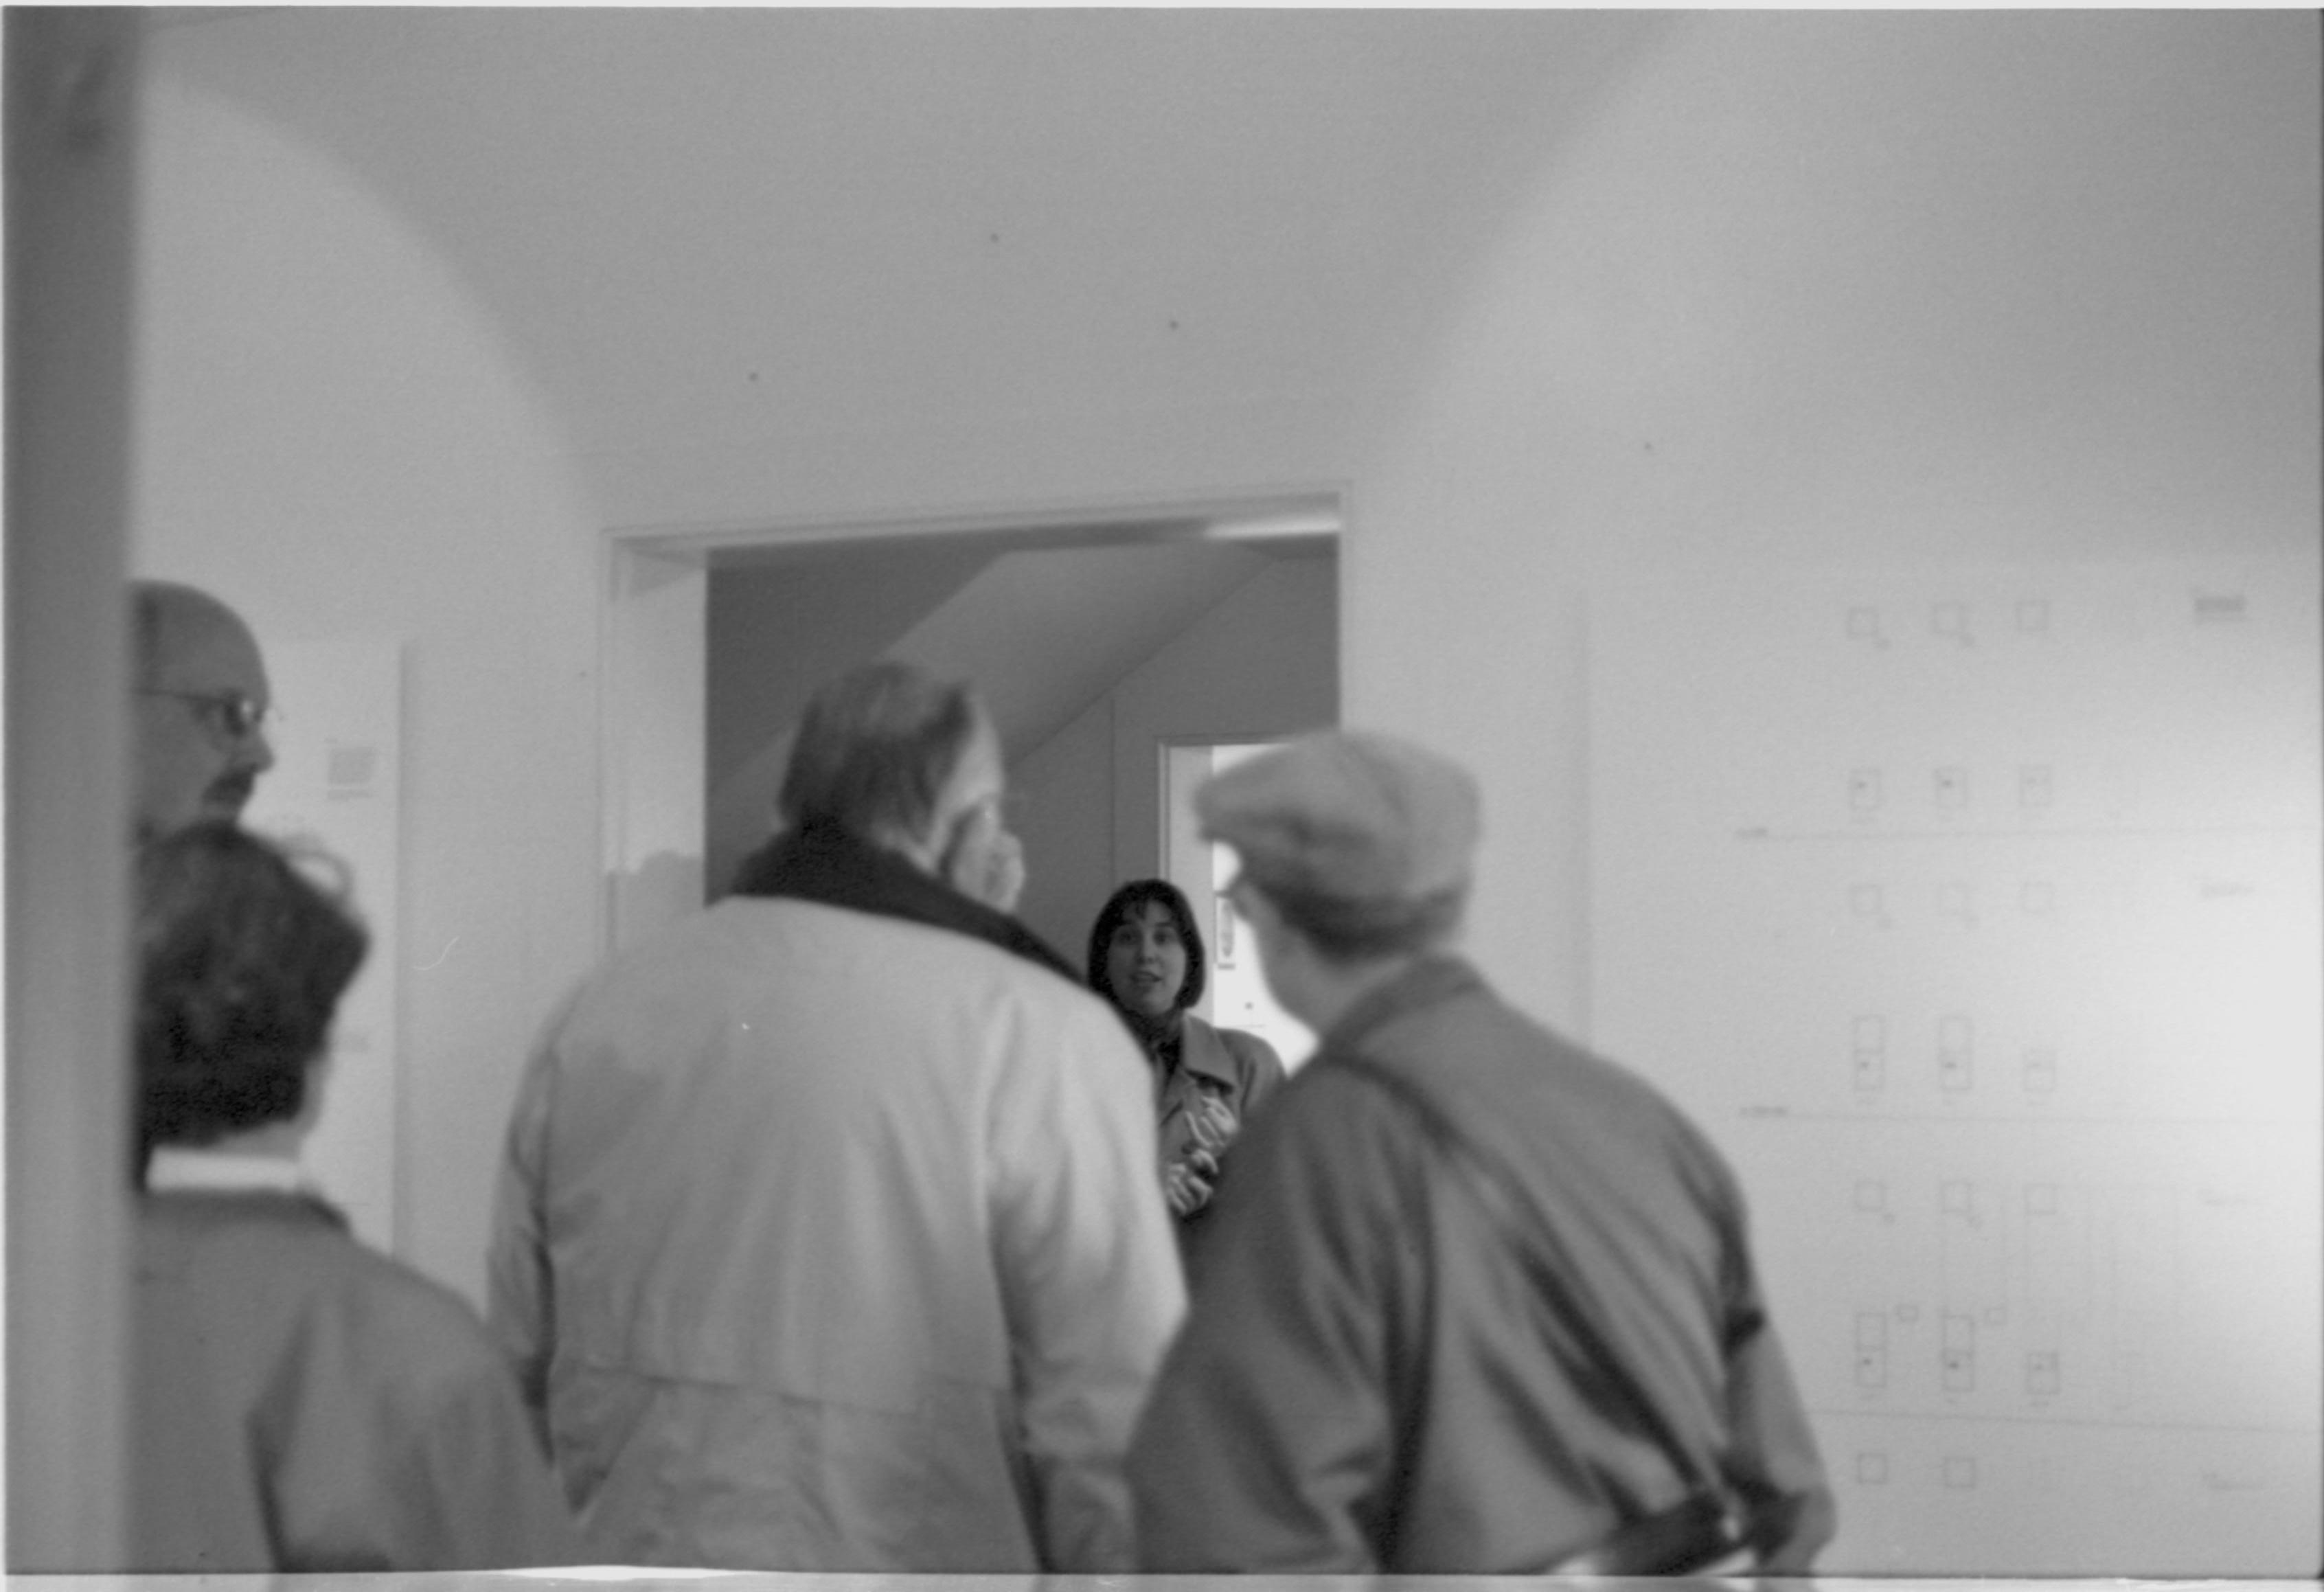 Ranger giving tour to guests 3-1997 Colloq (b/w); 25 Colloquium, 1997